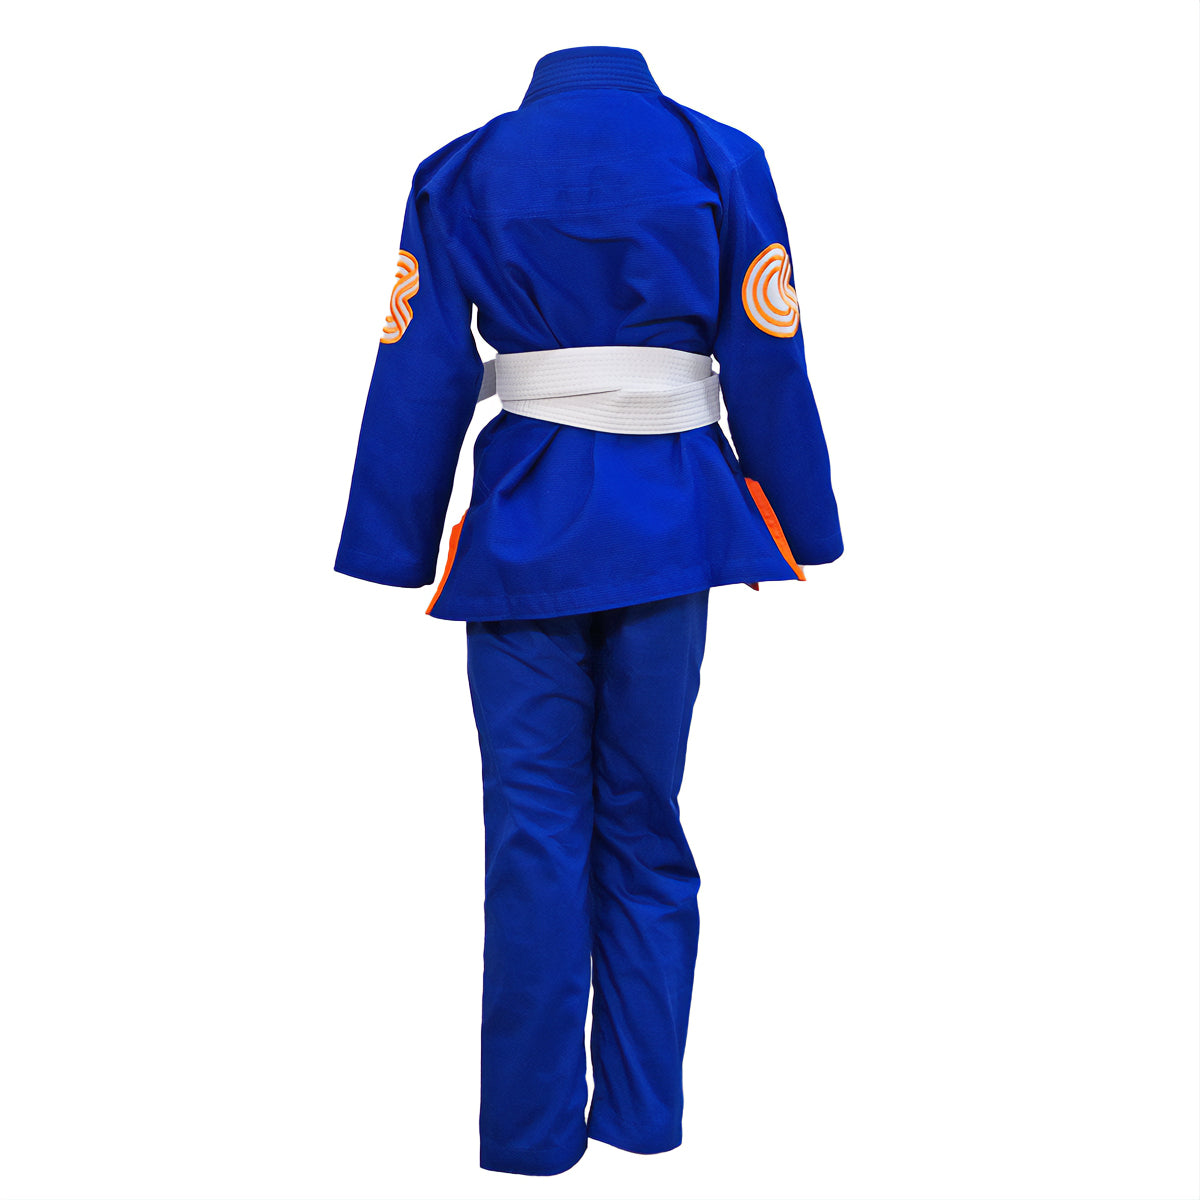 Chaos and Order Kid's Base Label V2 BJJ Gi - Blue Chaos and Order